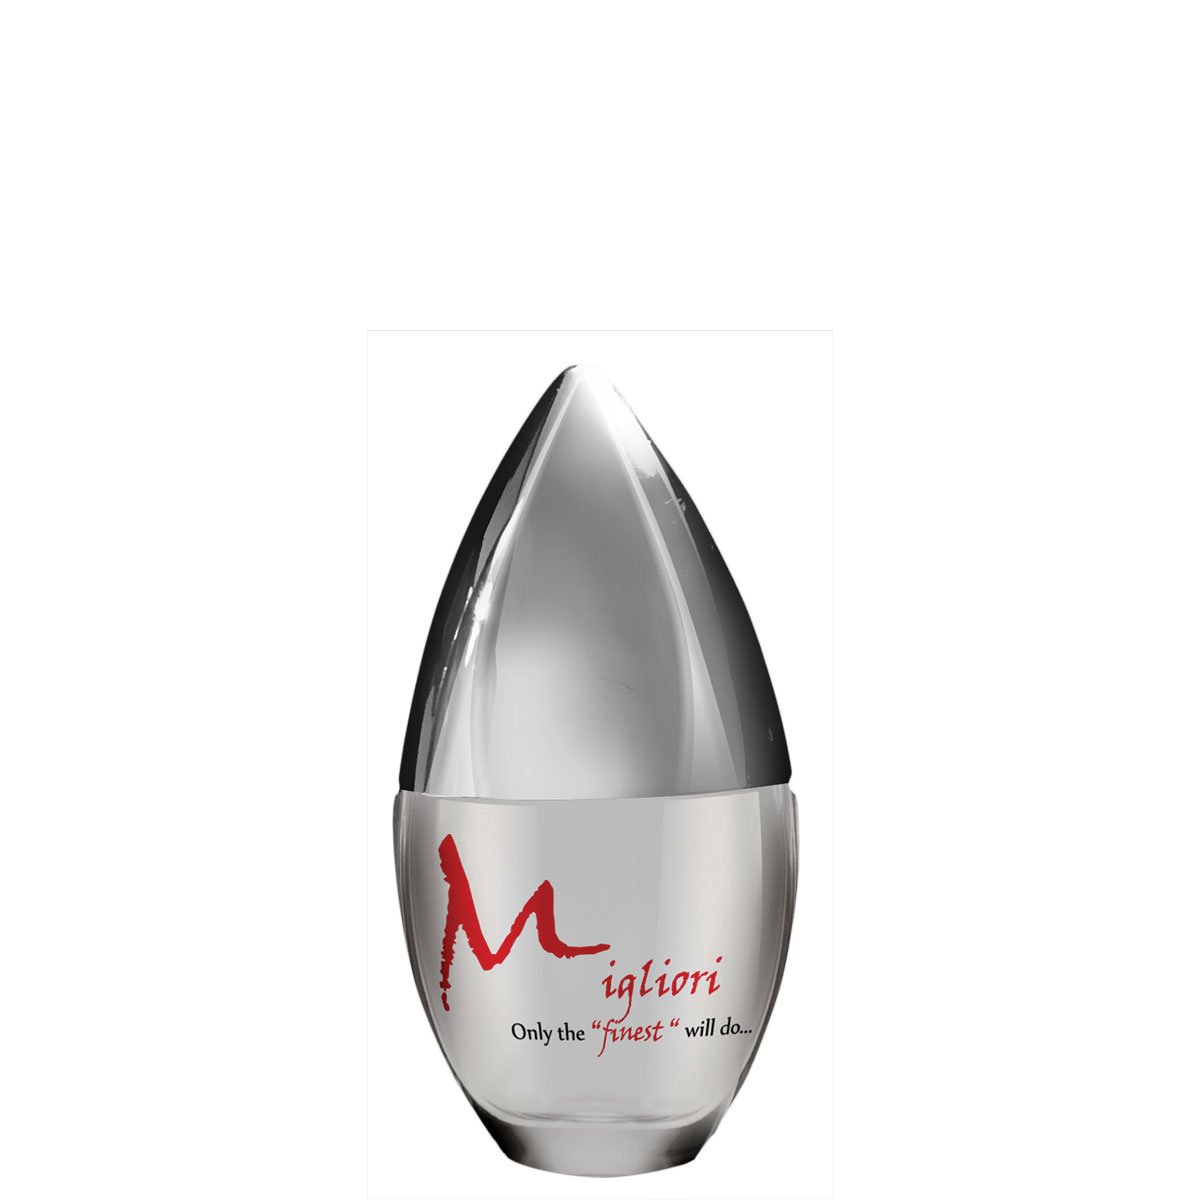 Migliori Lubricant - Buy At Luxury Toy X - Free 3-Day Shipping